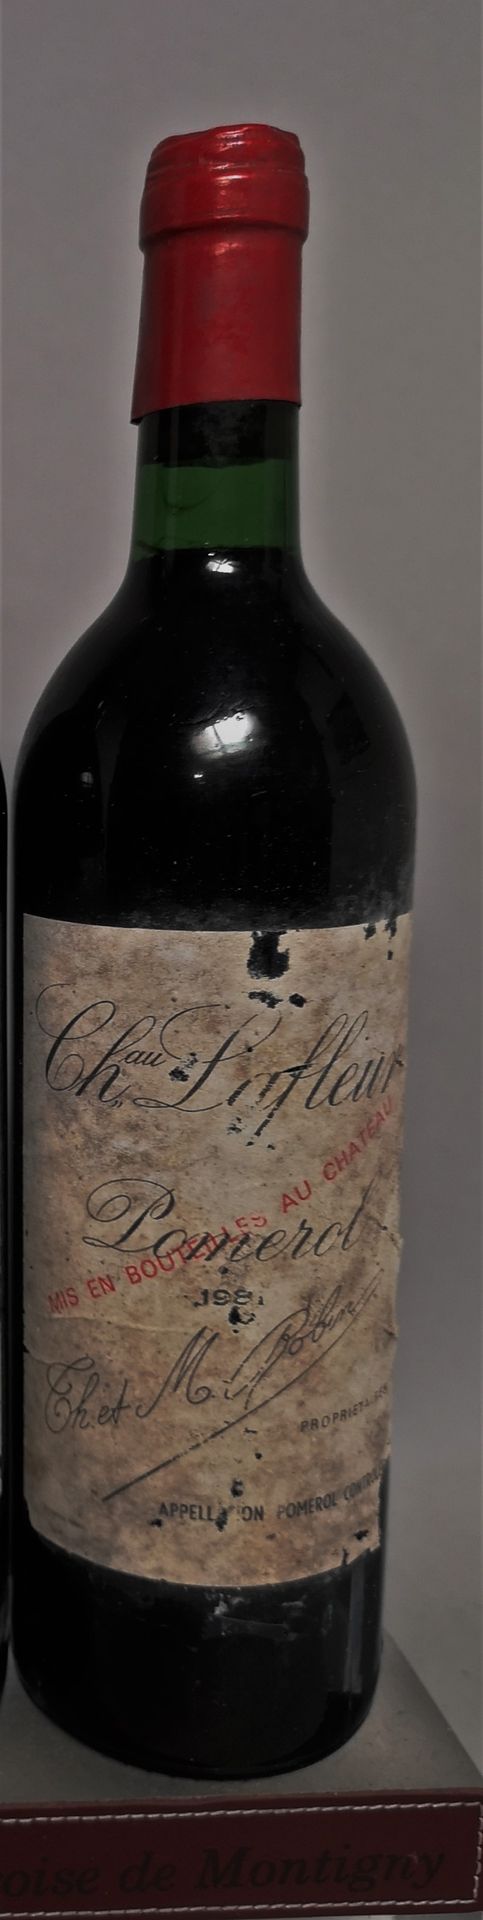 Null 
1 bottle Château LAFLEUR - Pomerol, 1981. 	

Stained and damaged label.

L&hellip;